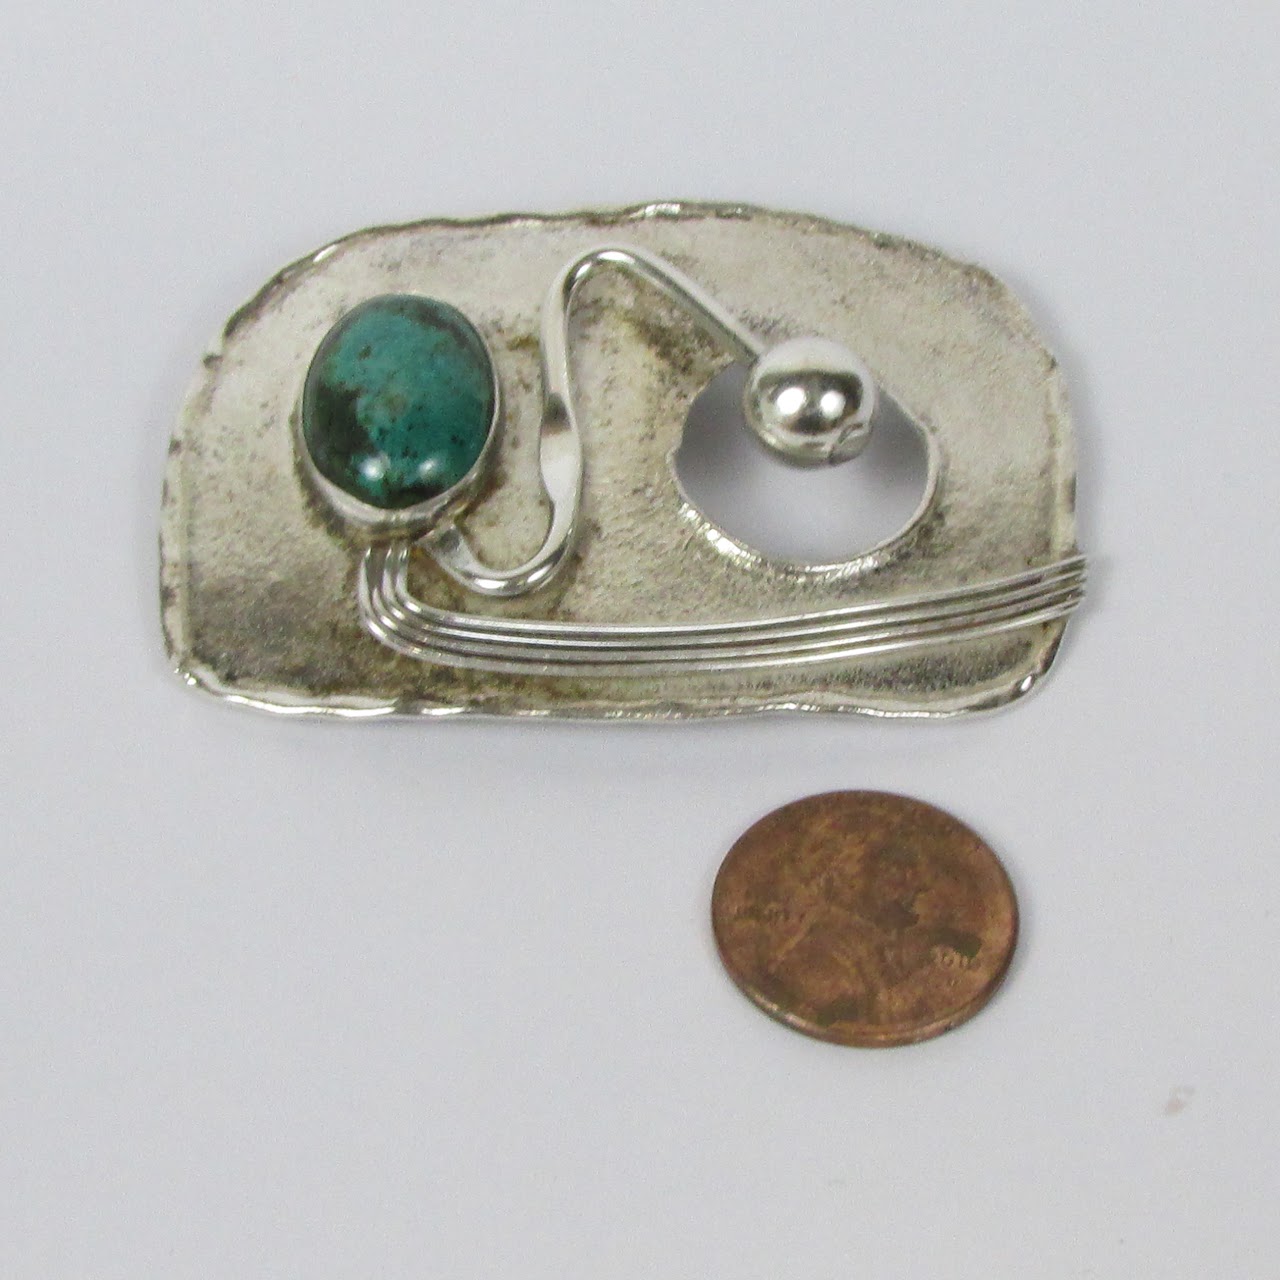 Silver & Turquoise Handmade Modernist Convertible Brooch